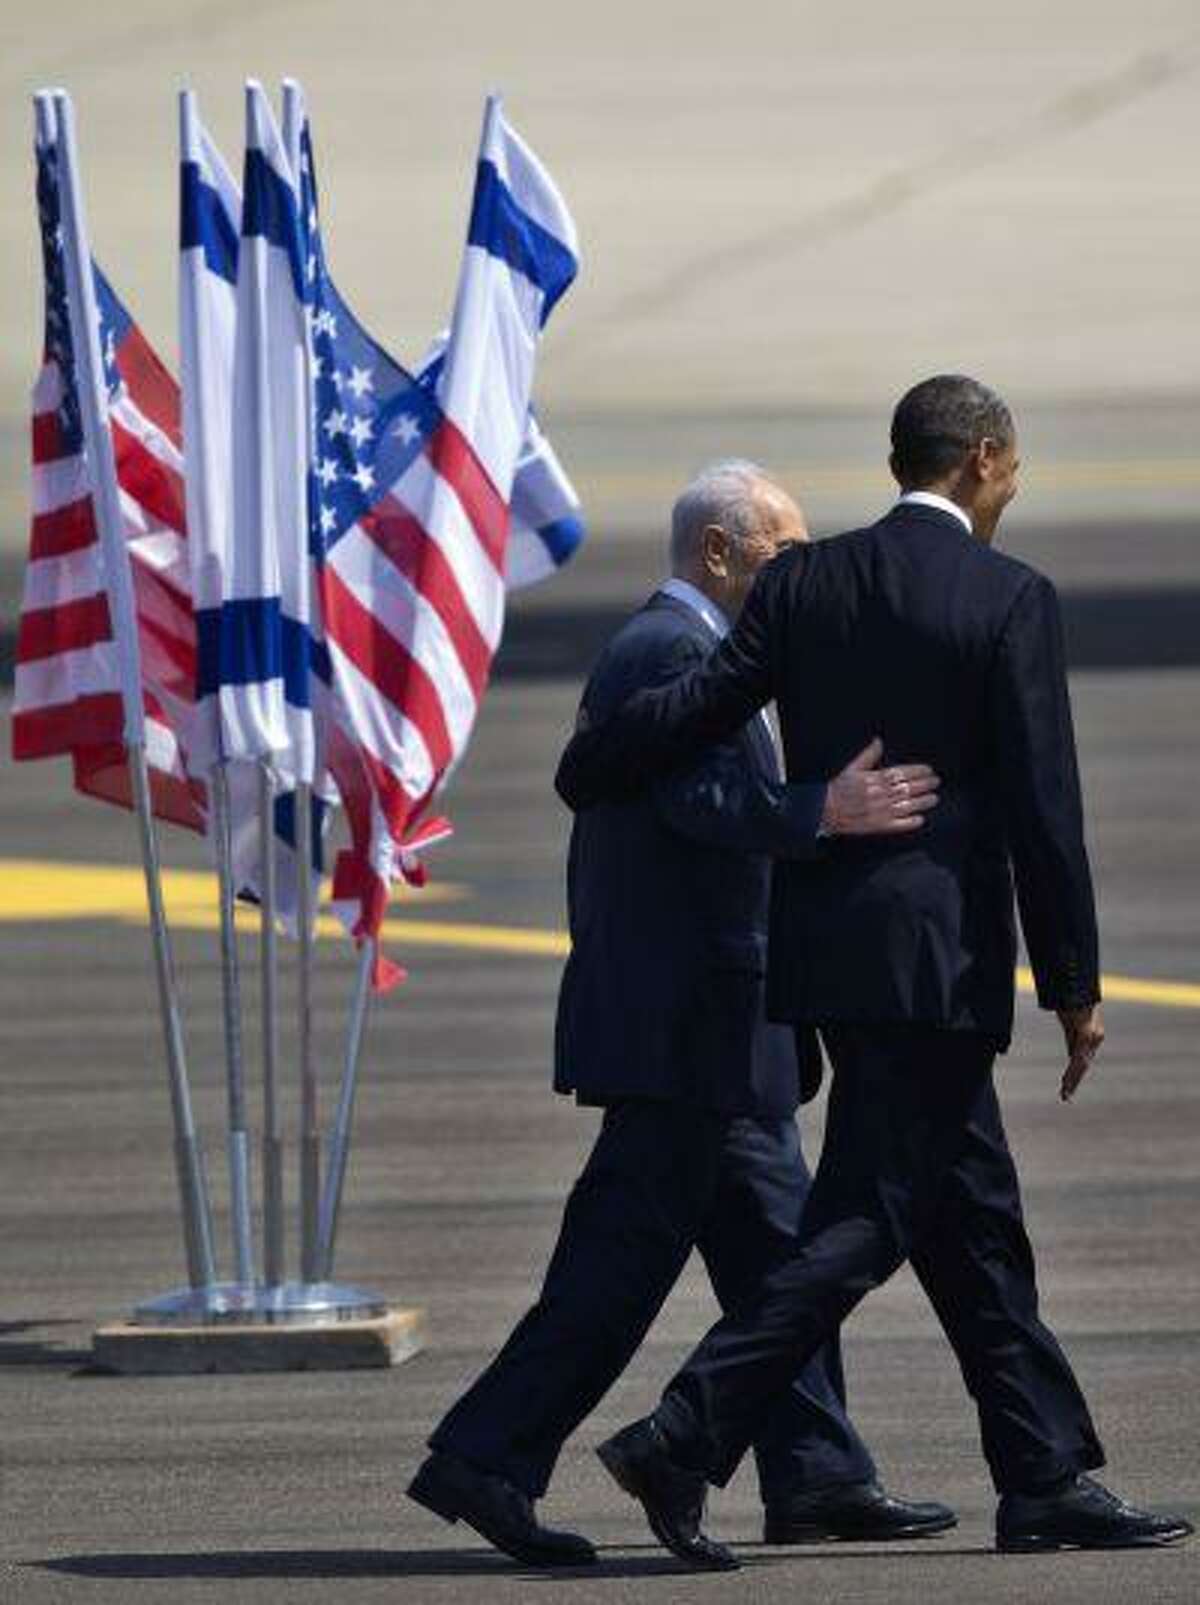 US President Barack Obama, right, and Israel's President Shimon Peres walk together at the end of welcoming ceremony upon Obama's arrival at Ben Gurion airport near Tel Aviv, Israel, Wednesday, March 20, 2013. President Barack Obama is declaring common cause with Israel, highlighting the bonds between the United States and its Mideast ally. He says he has made Israel the first stop of the first trip of his second term to restate his commitment to Israel's security. (AP Photo/Ariel Schalit)